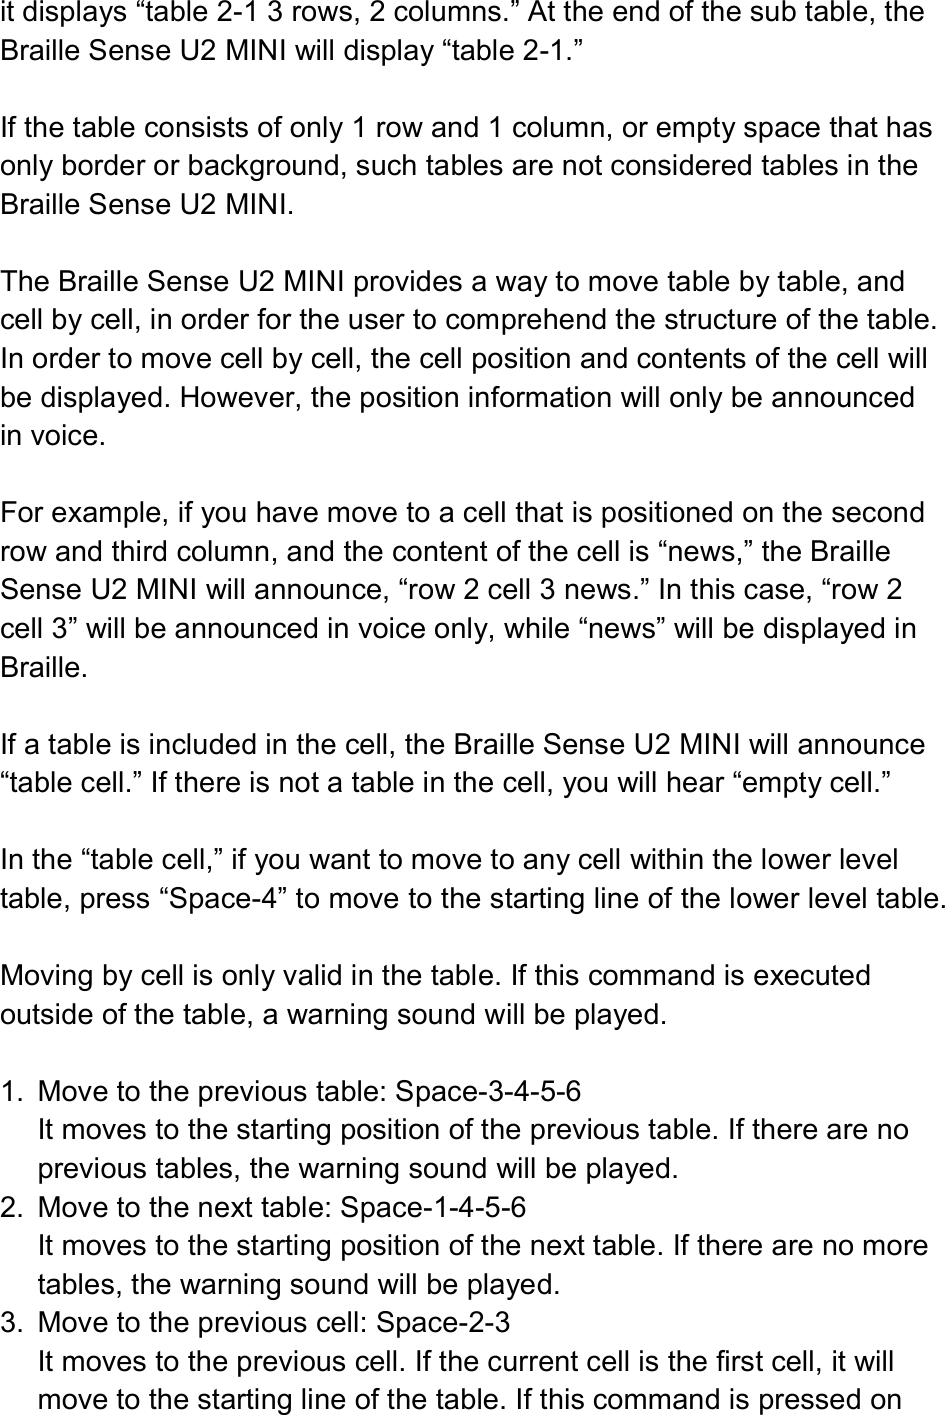  it displays “table 2-1 3 rows, 2 columns.” At the end of the sub table, the Braille Sense U2 MINI will display “table 2-1.”  If the table consists of only 1 row and 1 column, or empty space that has only border or background, such tables are not considered tables in the Braille Sense U2 MINI.  The Braille Sense U2 MINI provides a way to move table by table, and cell by cell, in order for the user to comprehend the structure of the table. In order to move cell by cell, the cell position and contents of the cell will be displayed. However, the position information will only be announced in voice.  For example, if you have move to a cell that is positioned on the second row and third column, and the content of the cell is “news,” the Braille Sense U2 MINI will announce, “row 2 cell 3 news.” In this case, “row 2 cell 3” will be announced in voice only, while “news” will be displayed in Braille.  If a table is included in the cell, the Braille Sense U2 MINI will announce “table cell.” If there is not a table in the cell, you will hear “empty cell.”  In the “table cell,” if you want to move to any cell within the lower level table, press “Space-4” to move to the starting line of the lower level table.    Moving by cell is only valid in the table. If this command is executed outside of the table, a warning sound will be played.  1.  Move to the previous table: Space-3-4-5-6 It moves to the starting position of the previous table. If there are no previous tables, the warning sound will be played. 2.  Move to the next table: Space-1-4-5-6 It moves to the starting position of the next table. If there are no more tables, the warning sound will be played. 3.  Move to the previous cell: Space-2-3 It moves to the previous cell. If the current cell is the first cell, it will move to the starting line of the table. If this command is pressed on 